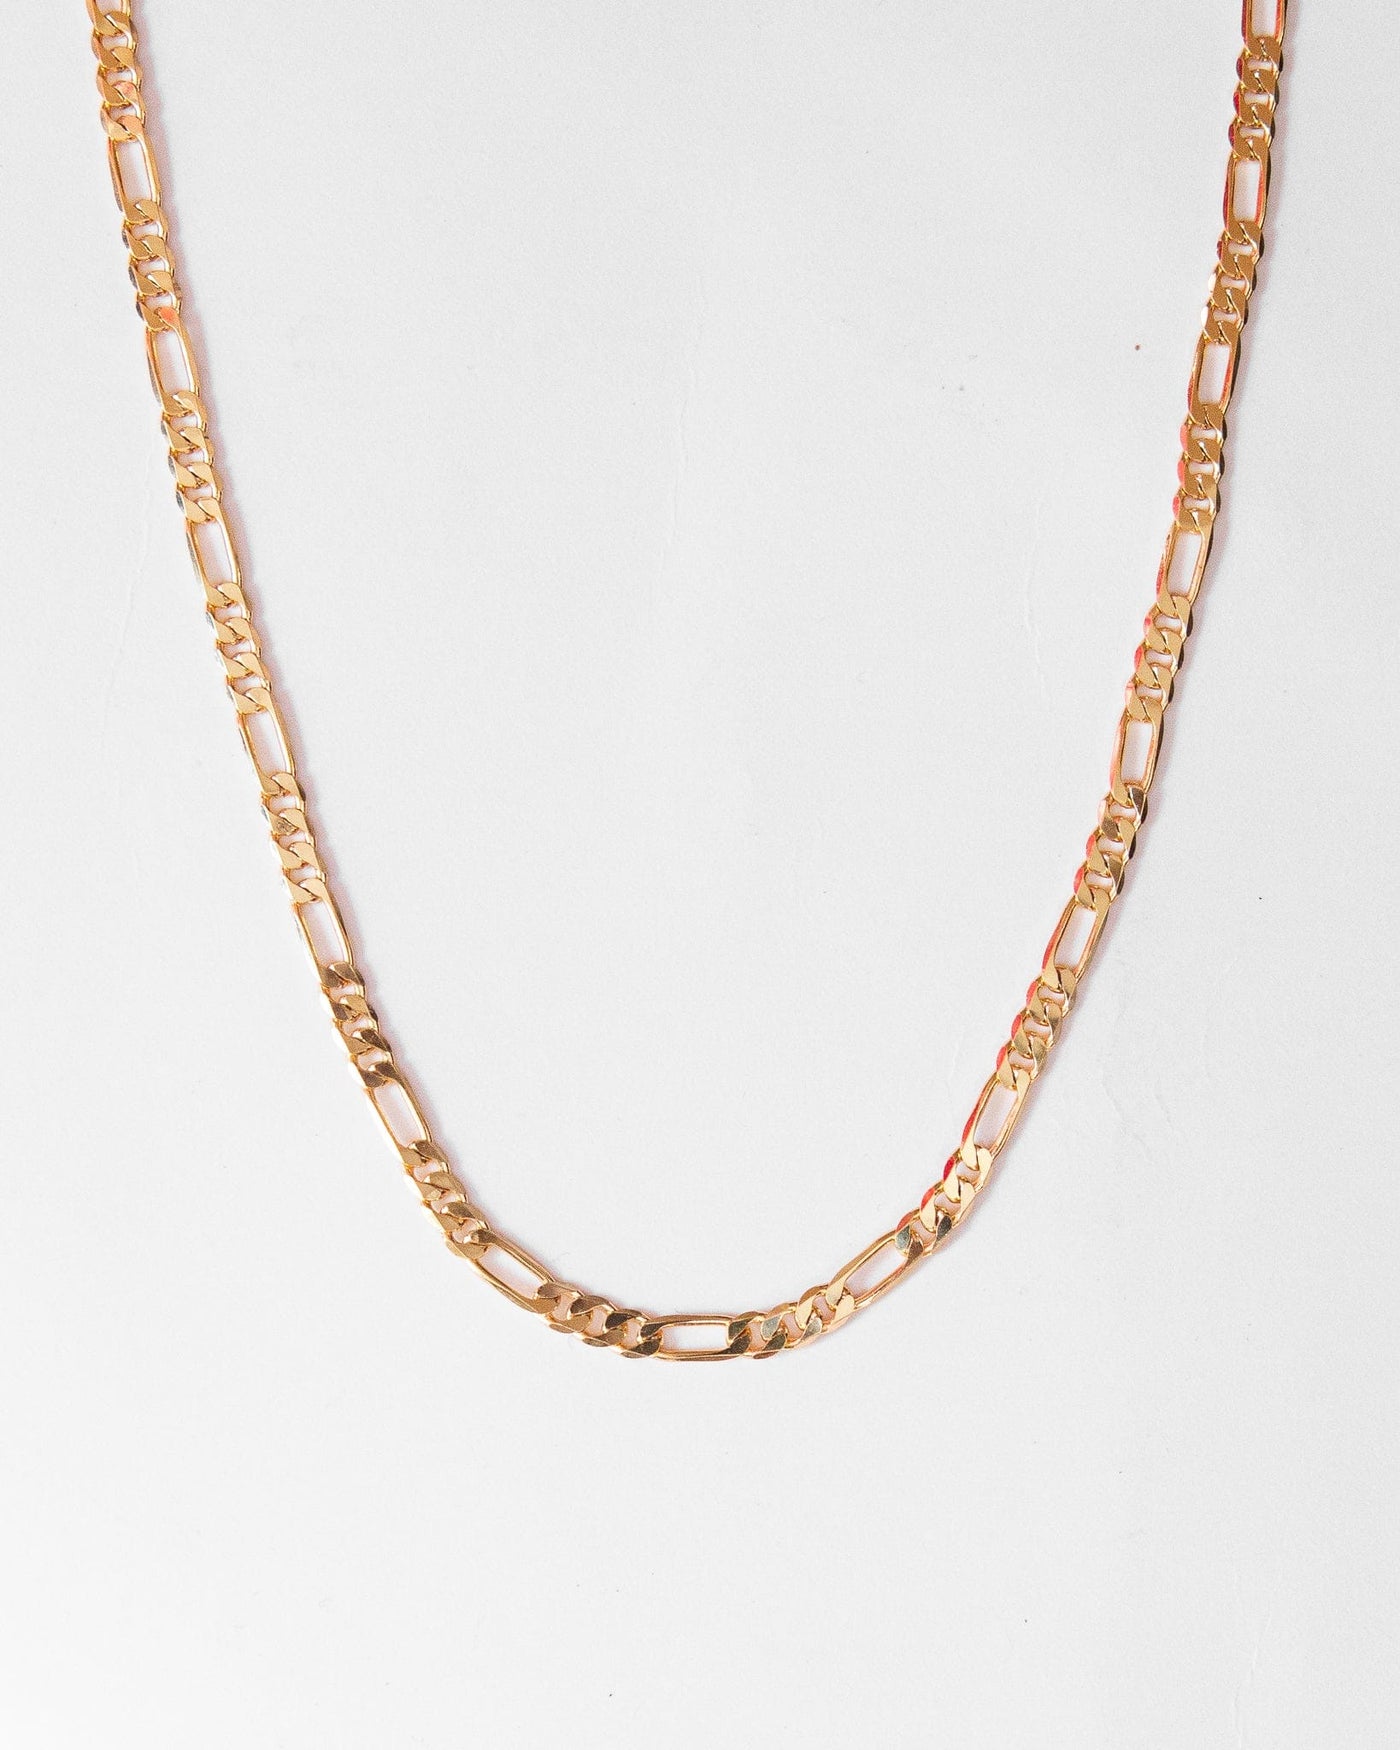 18k-gold-plated-sterling-silver-classic-cuban-and-figaro-chain-link-necklace